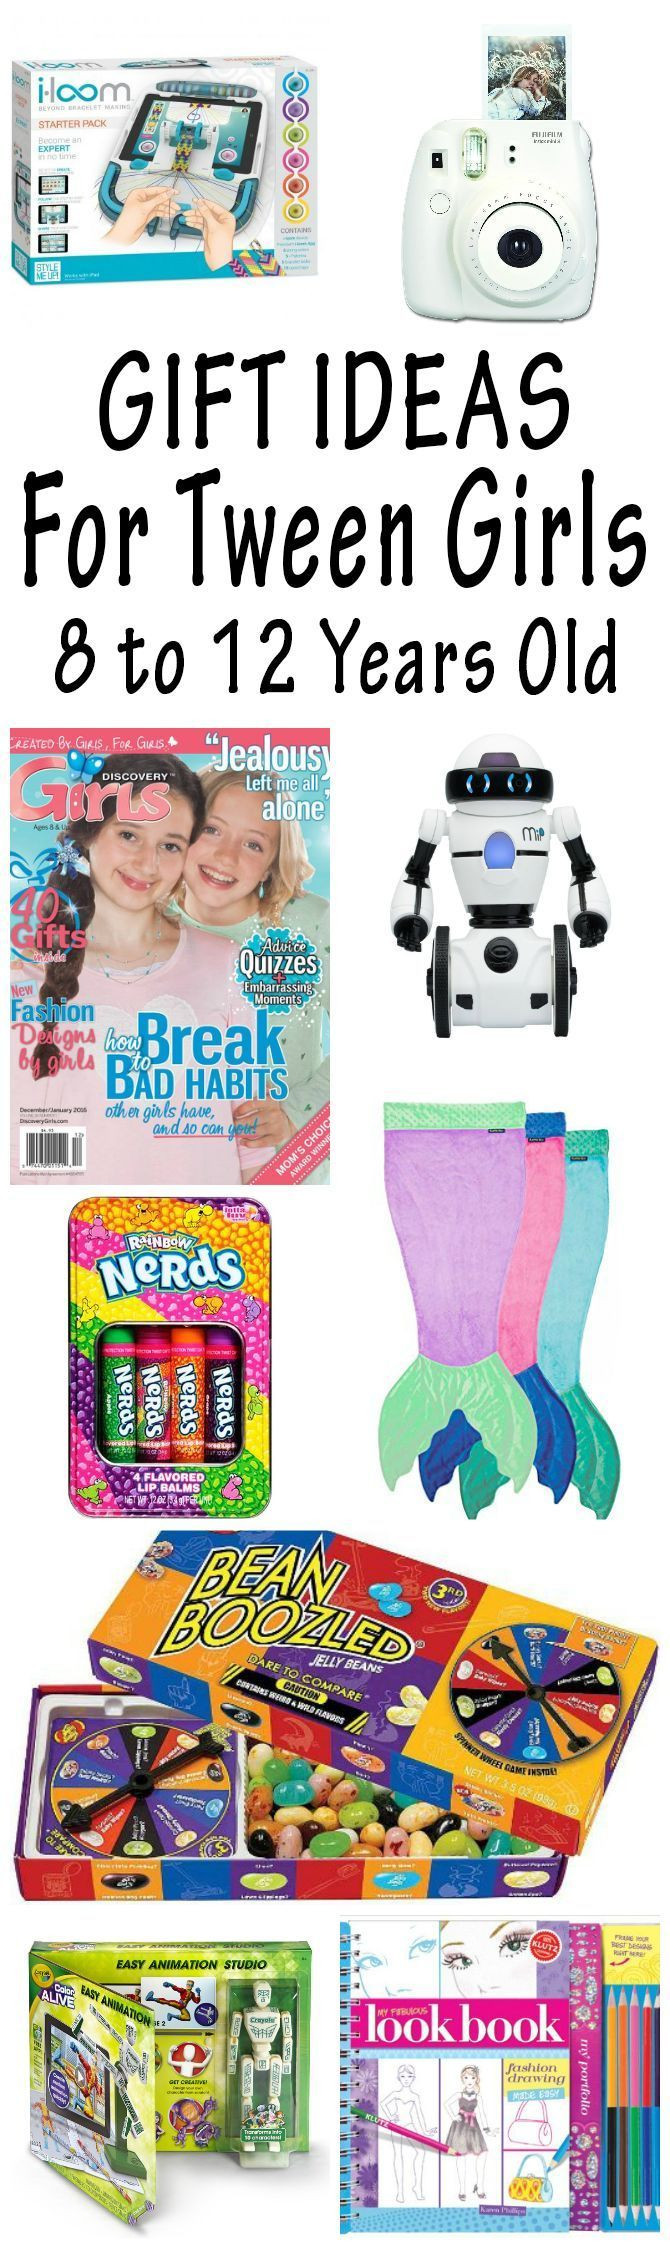 Girls Age 8 Gift Ideas
 24 best Gift Ideas Girls Age 8 to 12 images on Pinterest